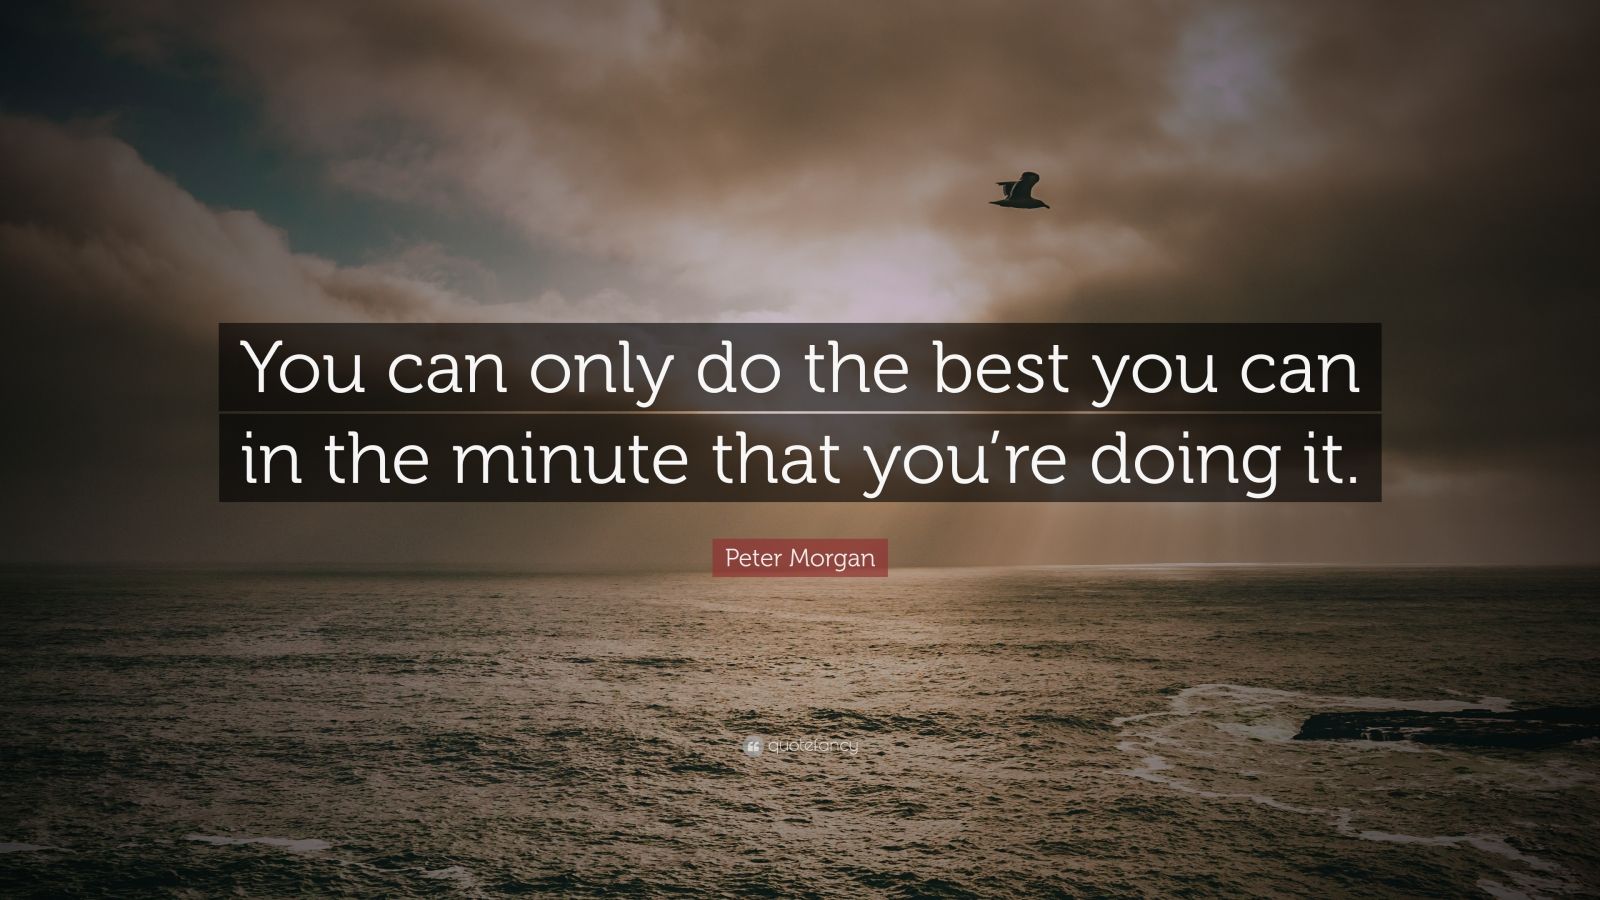 Peter Morgan Quote: “You can only do the best you can in the minute ...